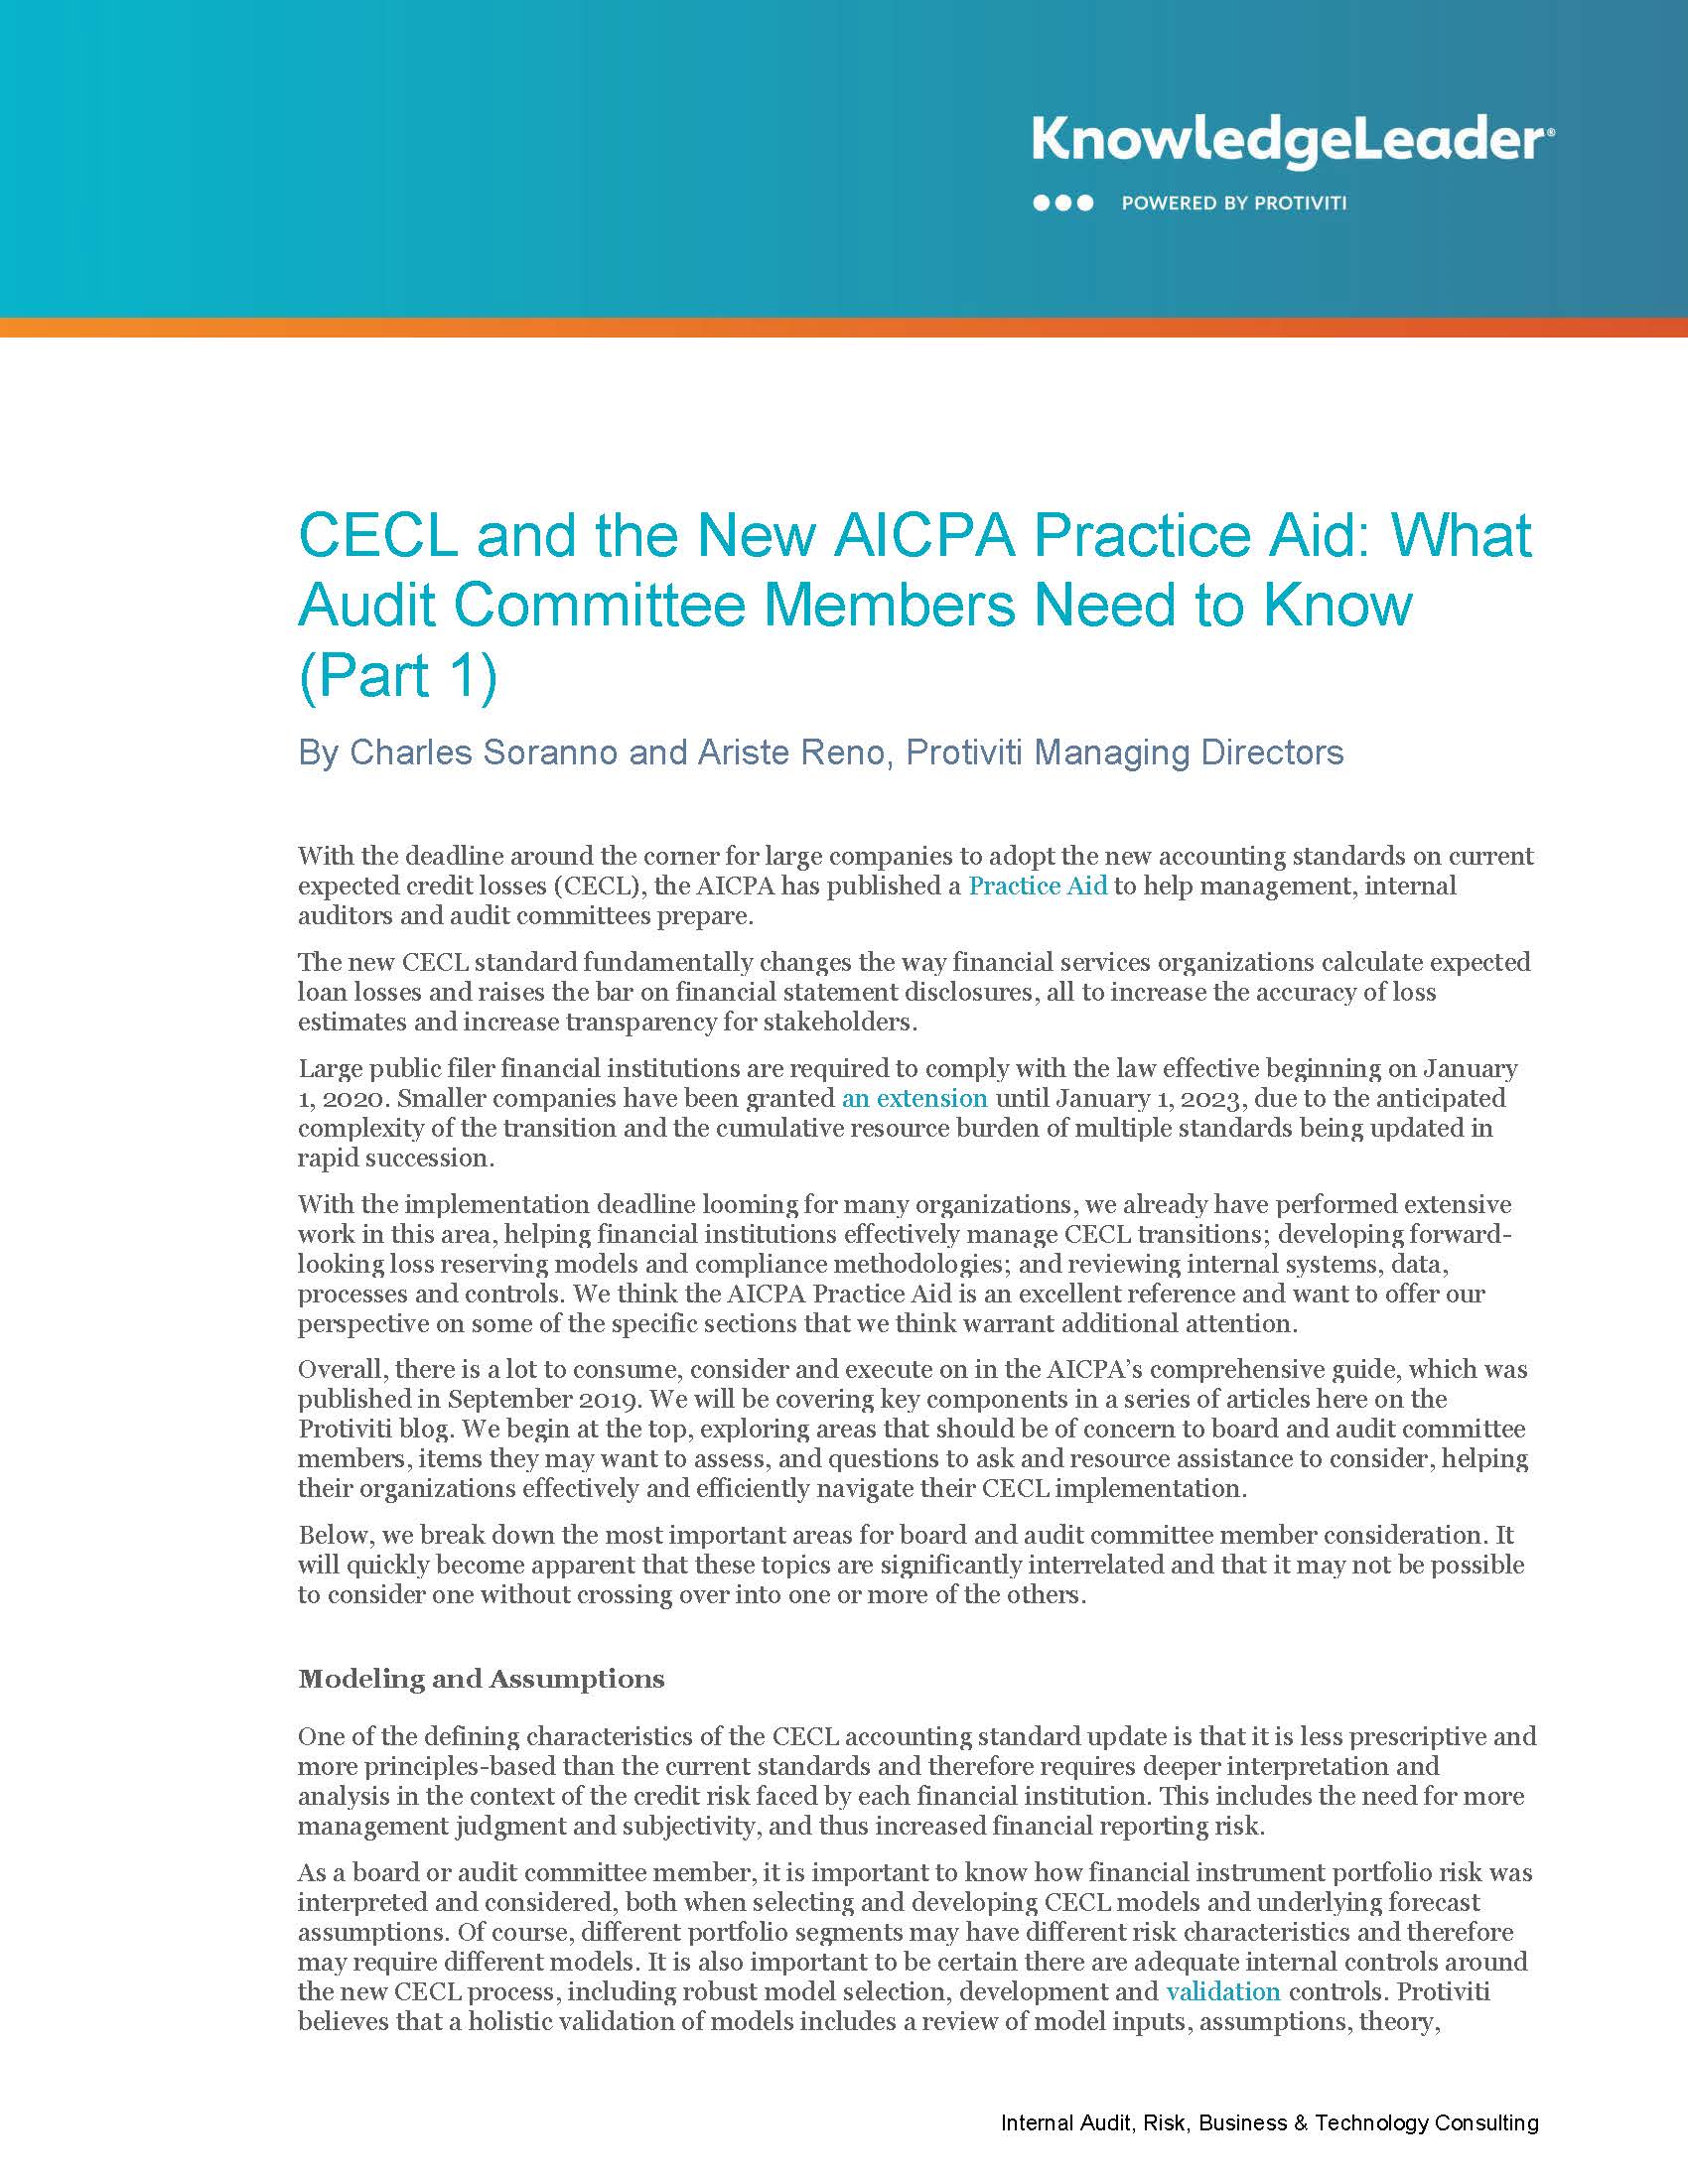 Screenshot of the first page of CECL and the new AICPA Practice Aid What Audit Committee Members Need to Know Part 1